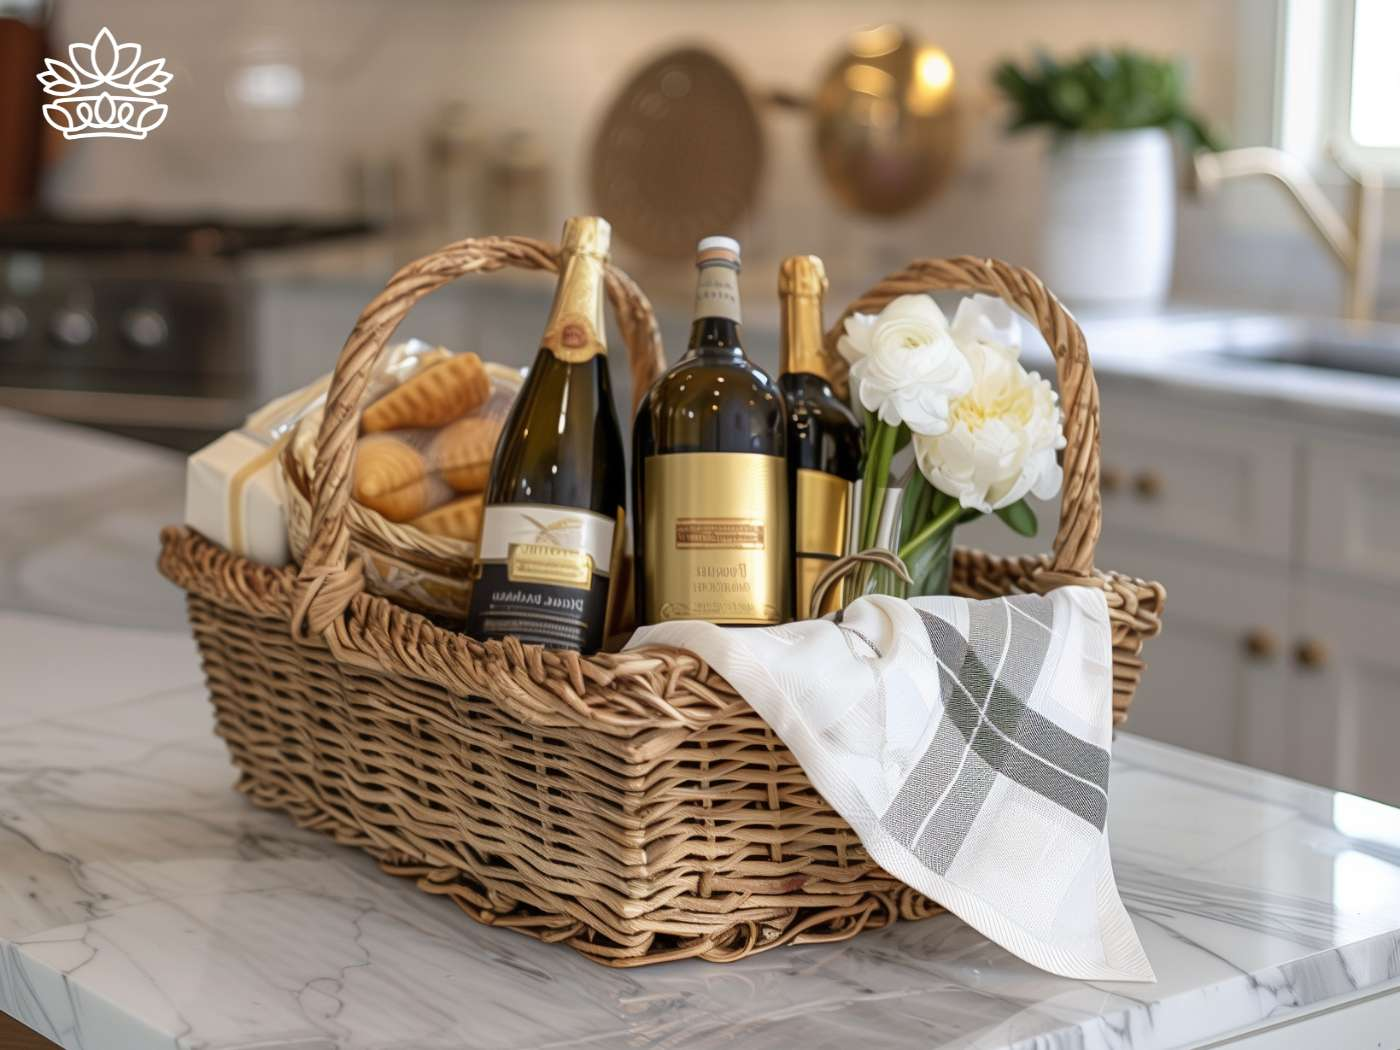 A luxurious wicker basket on a marble countertop filled with premium wine bottles, gourmet biscuits, and radiant white flowers, curated by Fabulous Flowers and Gifts.